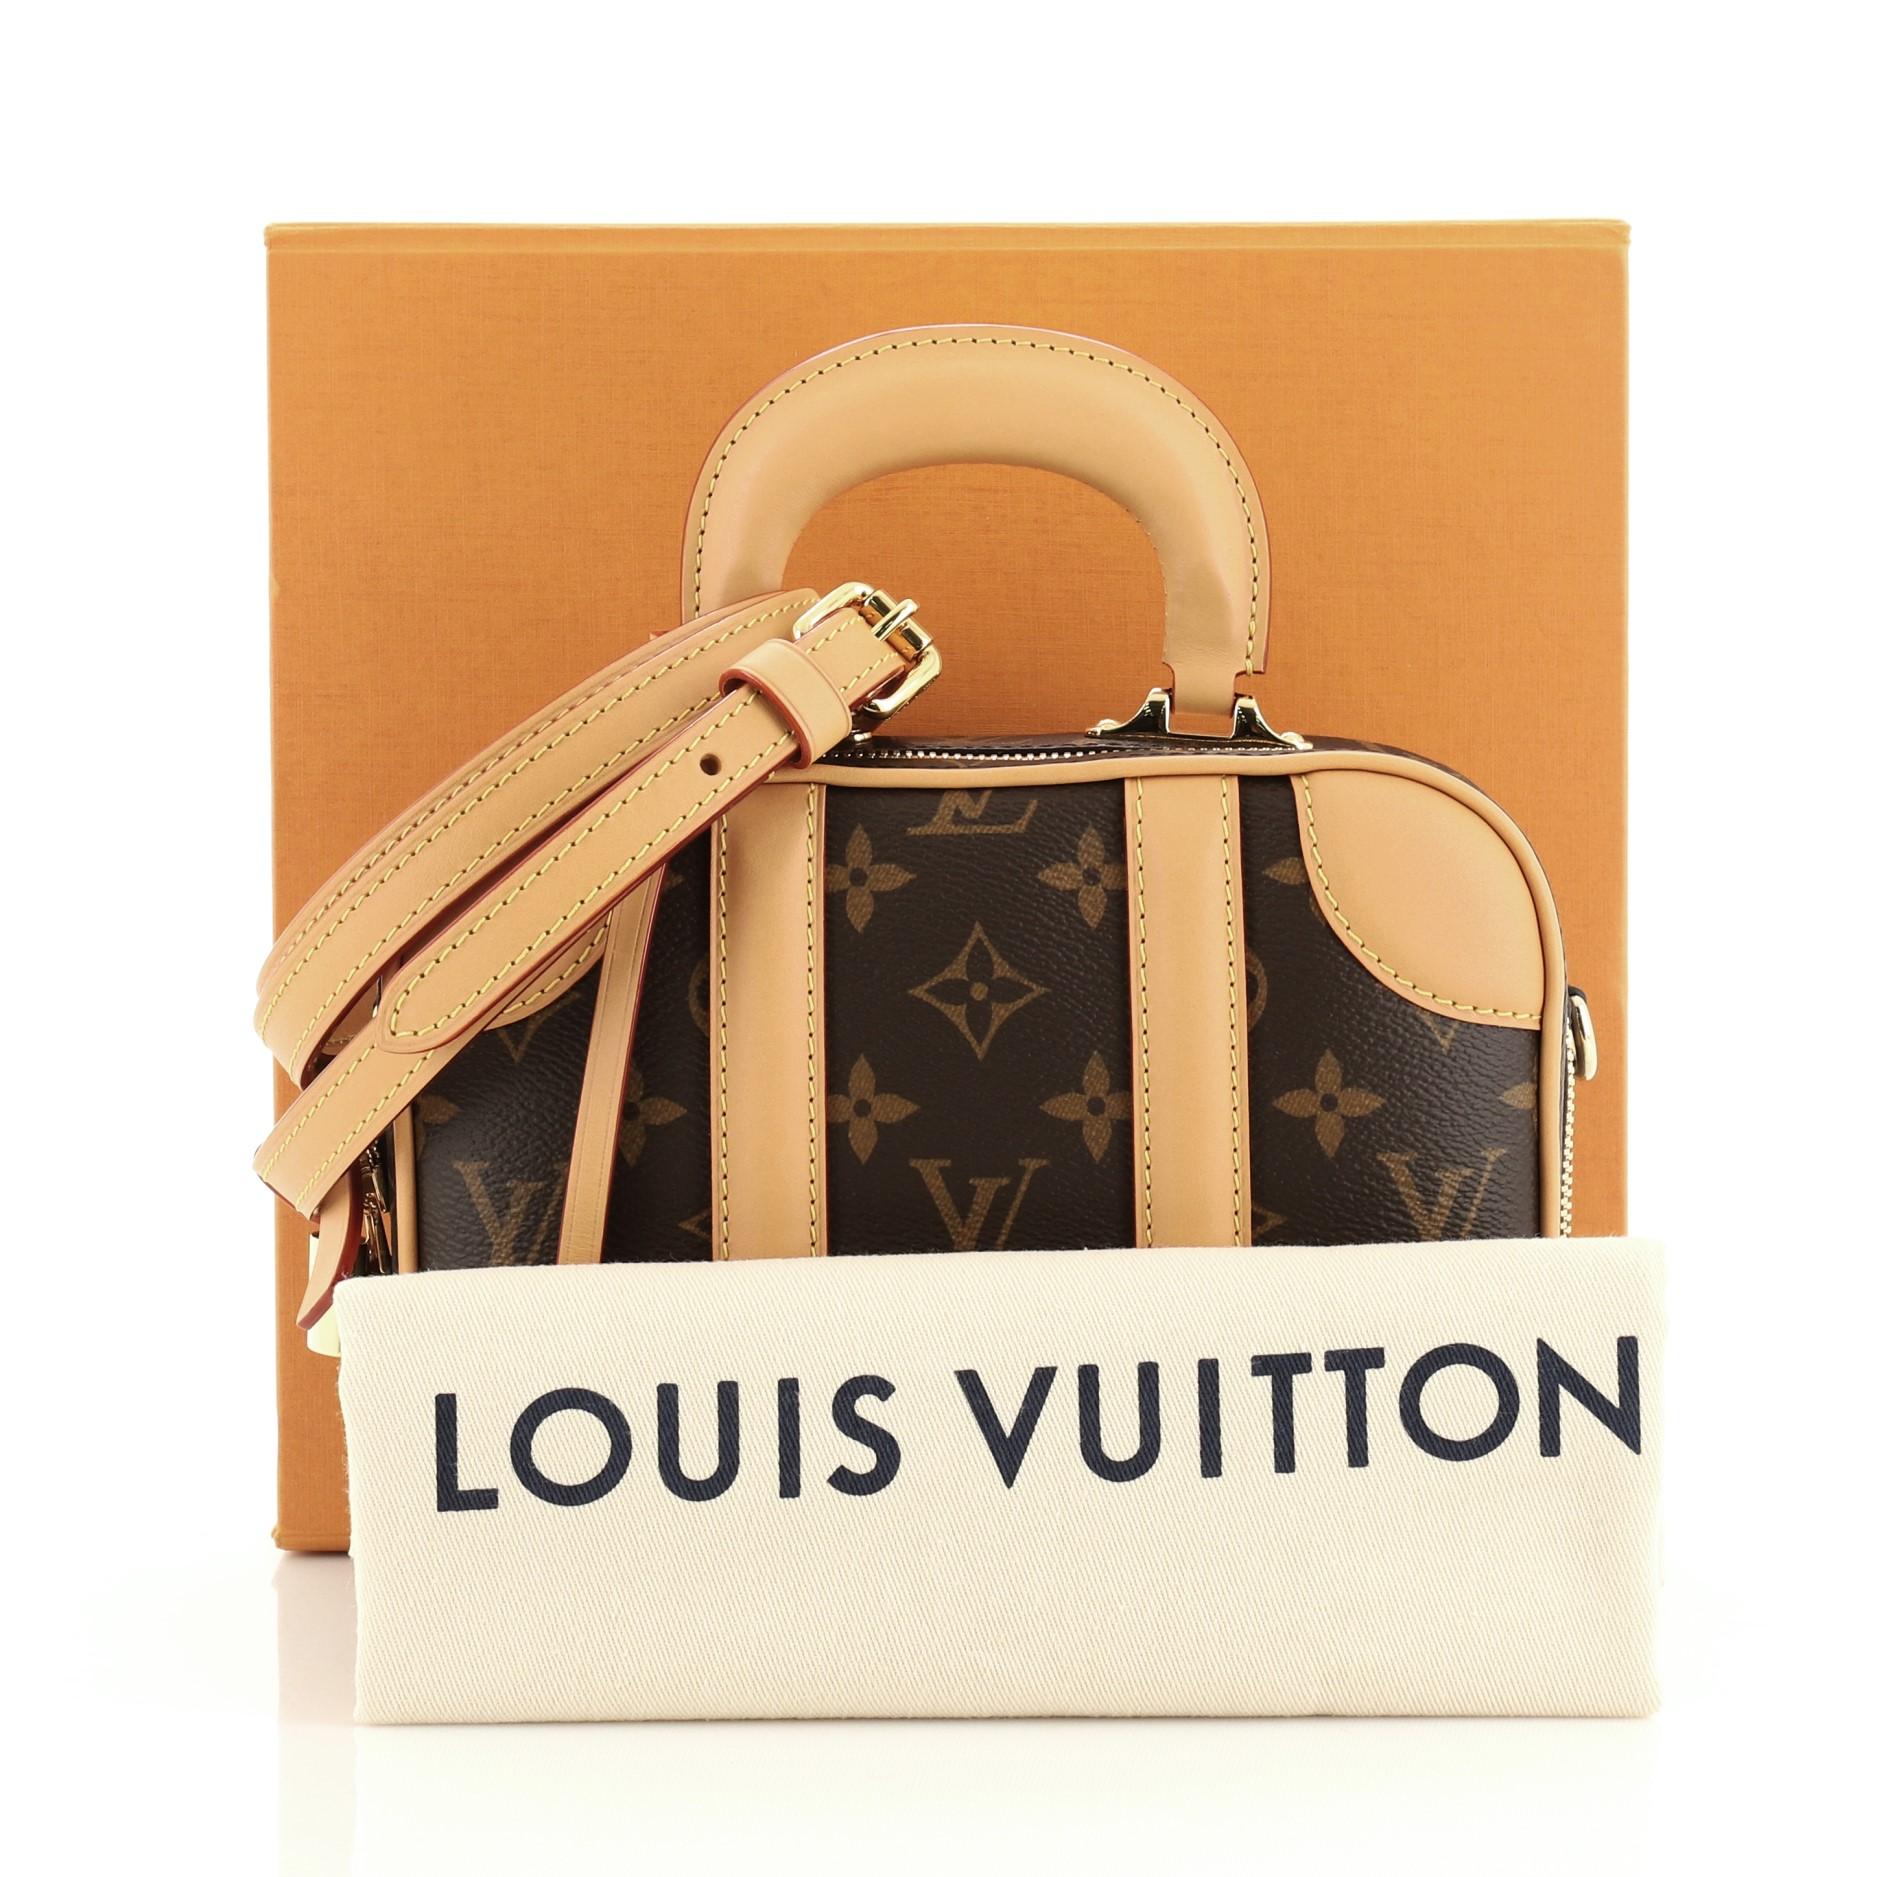 This Louis Vuitton Valisette Handbag Monogram Canvas BB, crafted from brown monogram coated canvas, features single top handle, cowhide leather trim and gold-tone hardware. Its zip closure opens to a neutral microfiber interior. Authenticity code